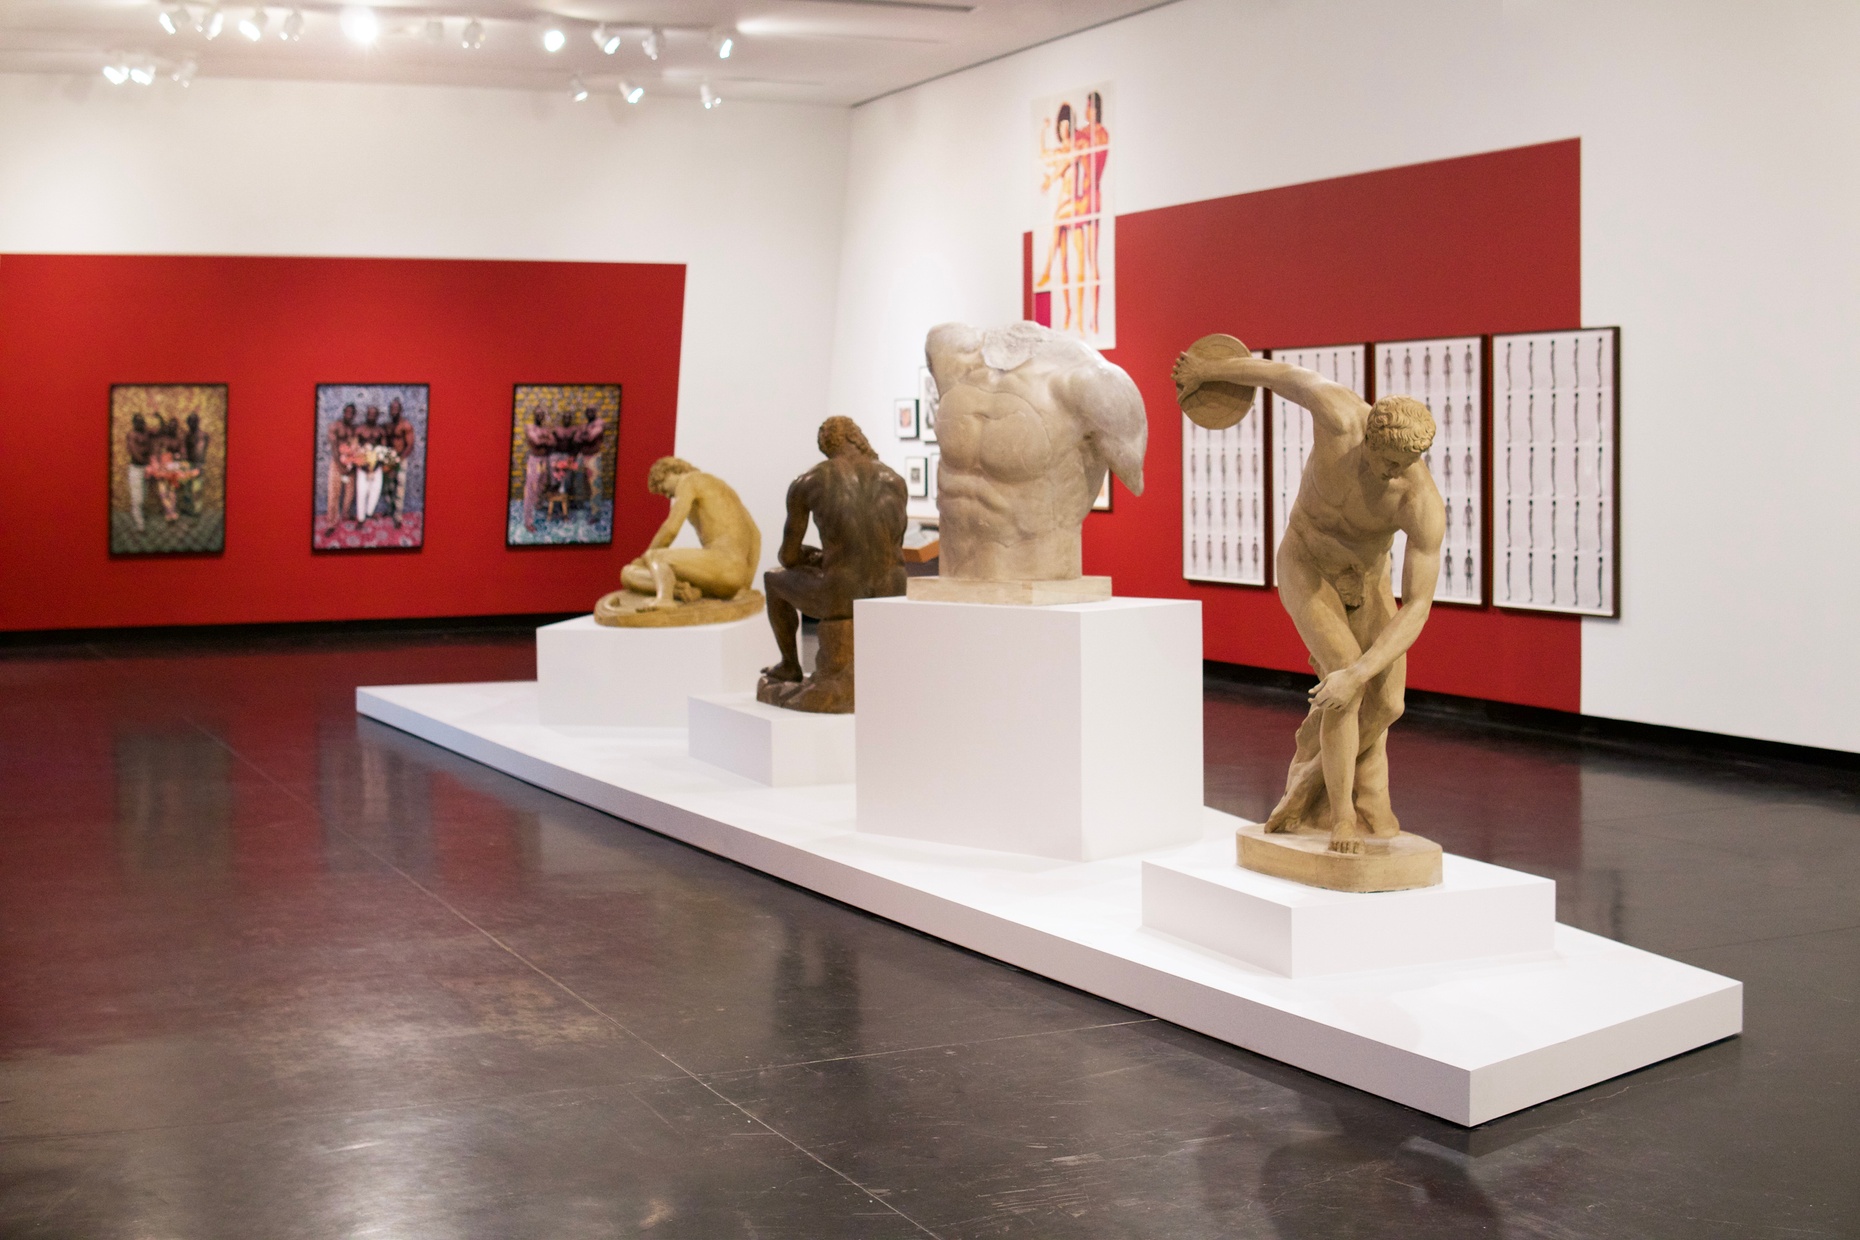 A gallery space with red and white painted walls and artworks featuring muscular people hung up. In the center of the gallery there are four classical sculptures featuring muscular, nude men and a torso.